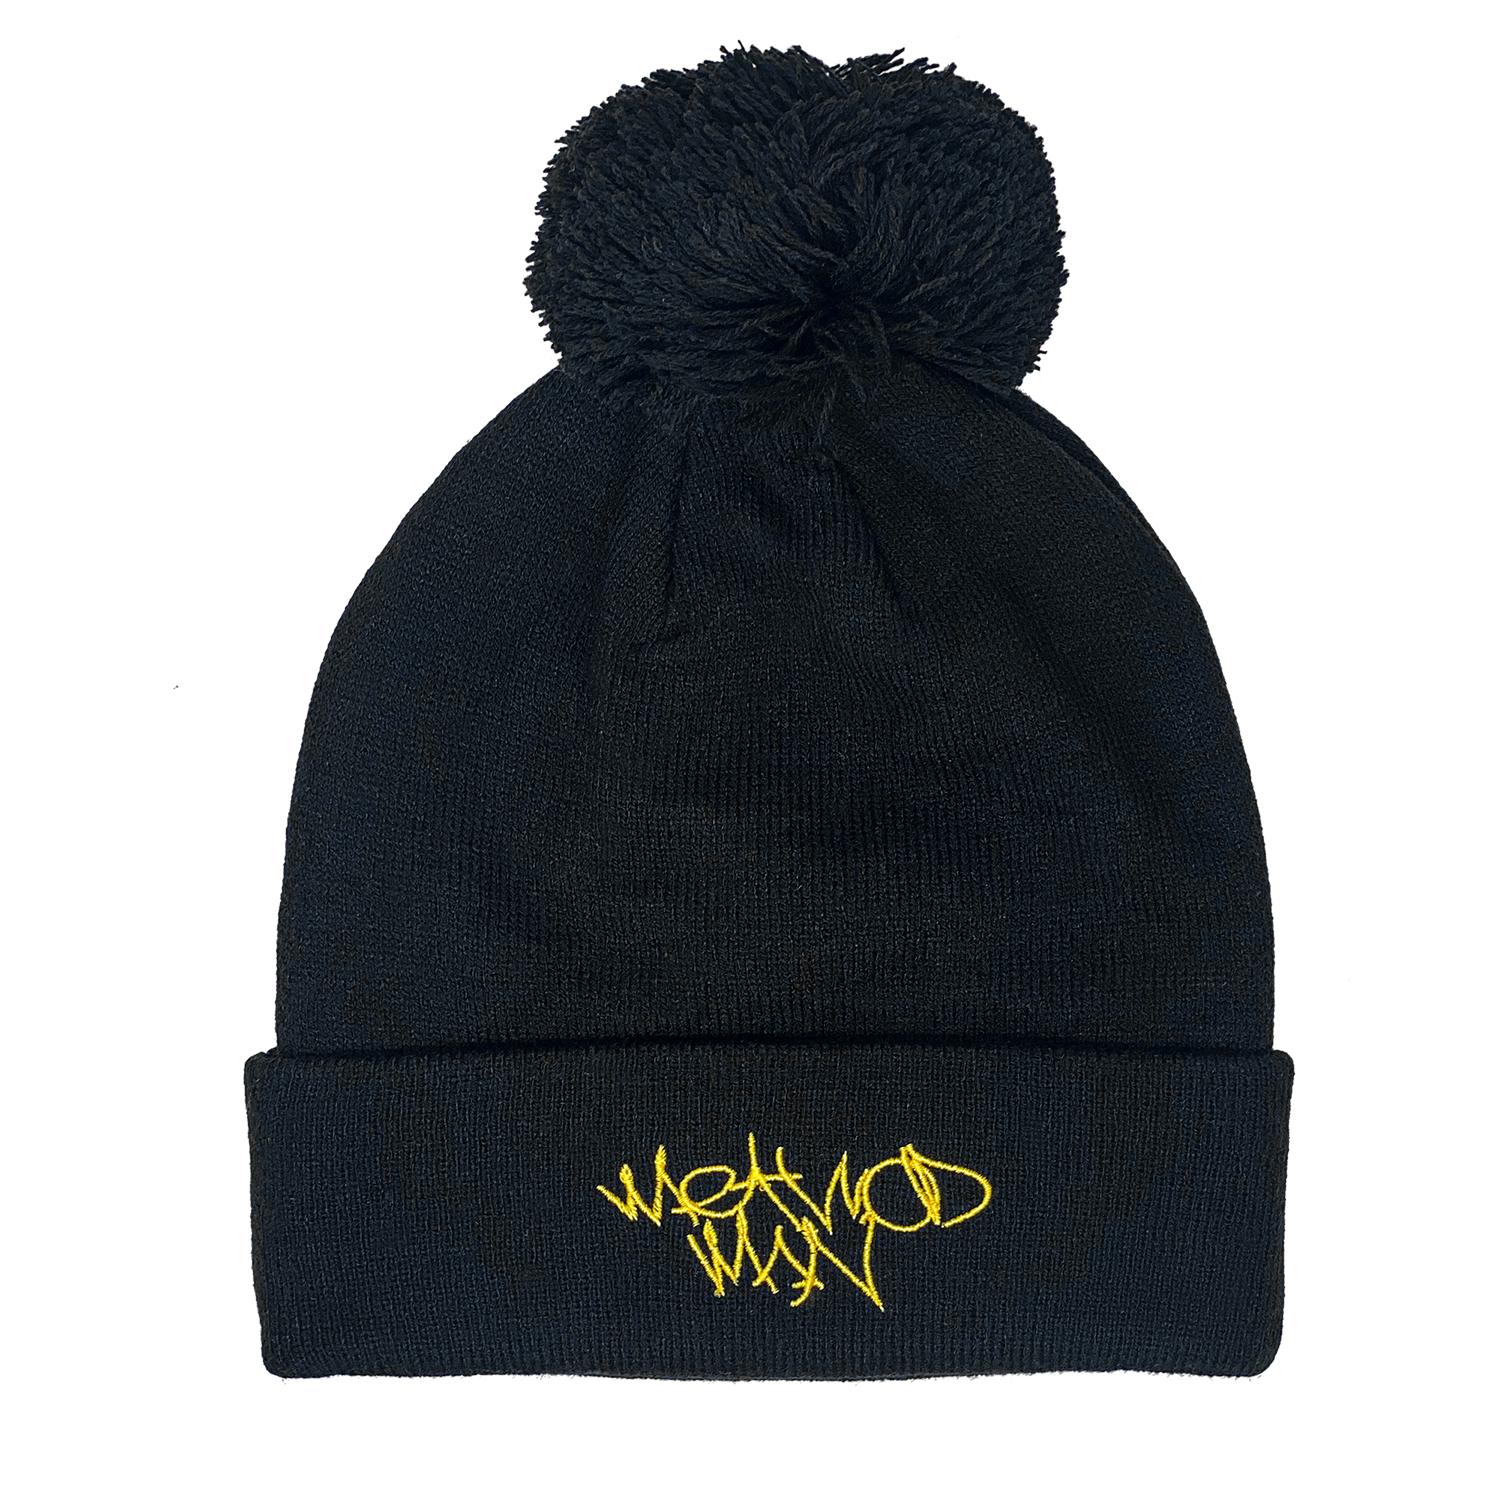 TICAL Hand Lettered Knit Cuffed Beanie with Pom Black and Yellow